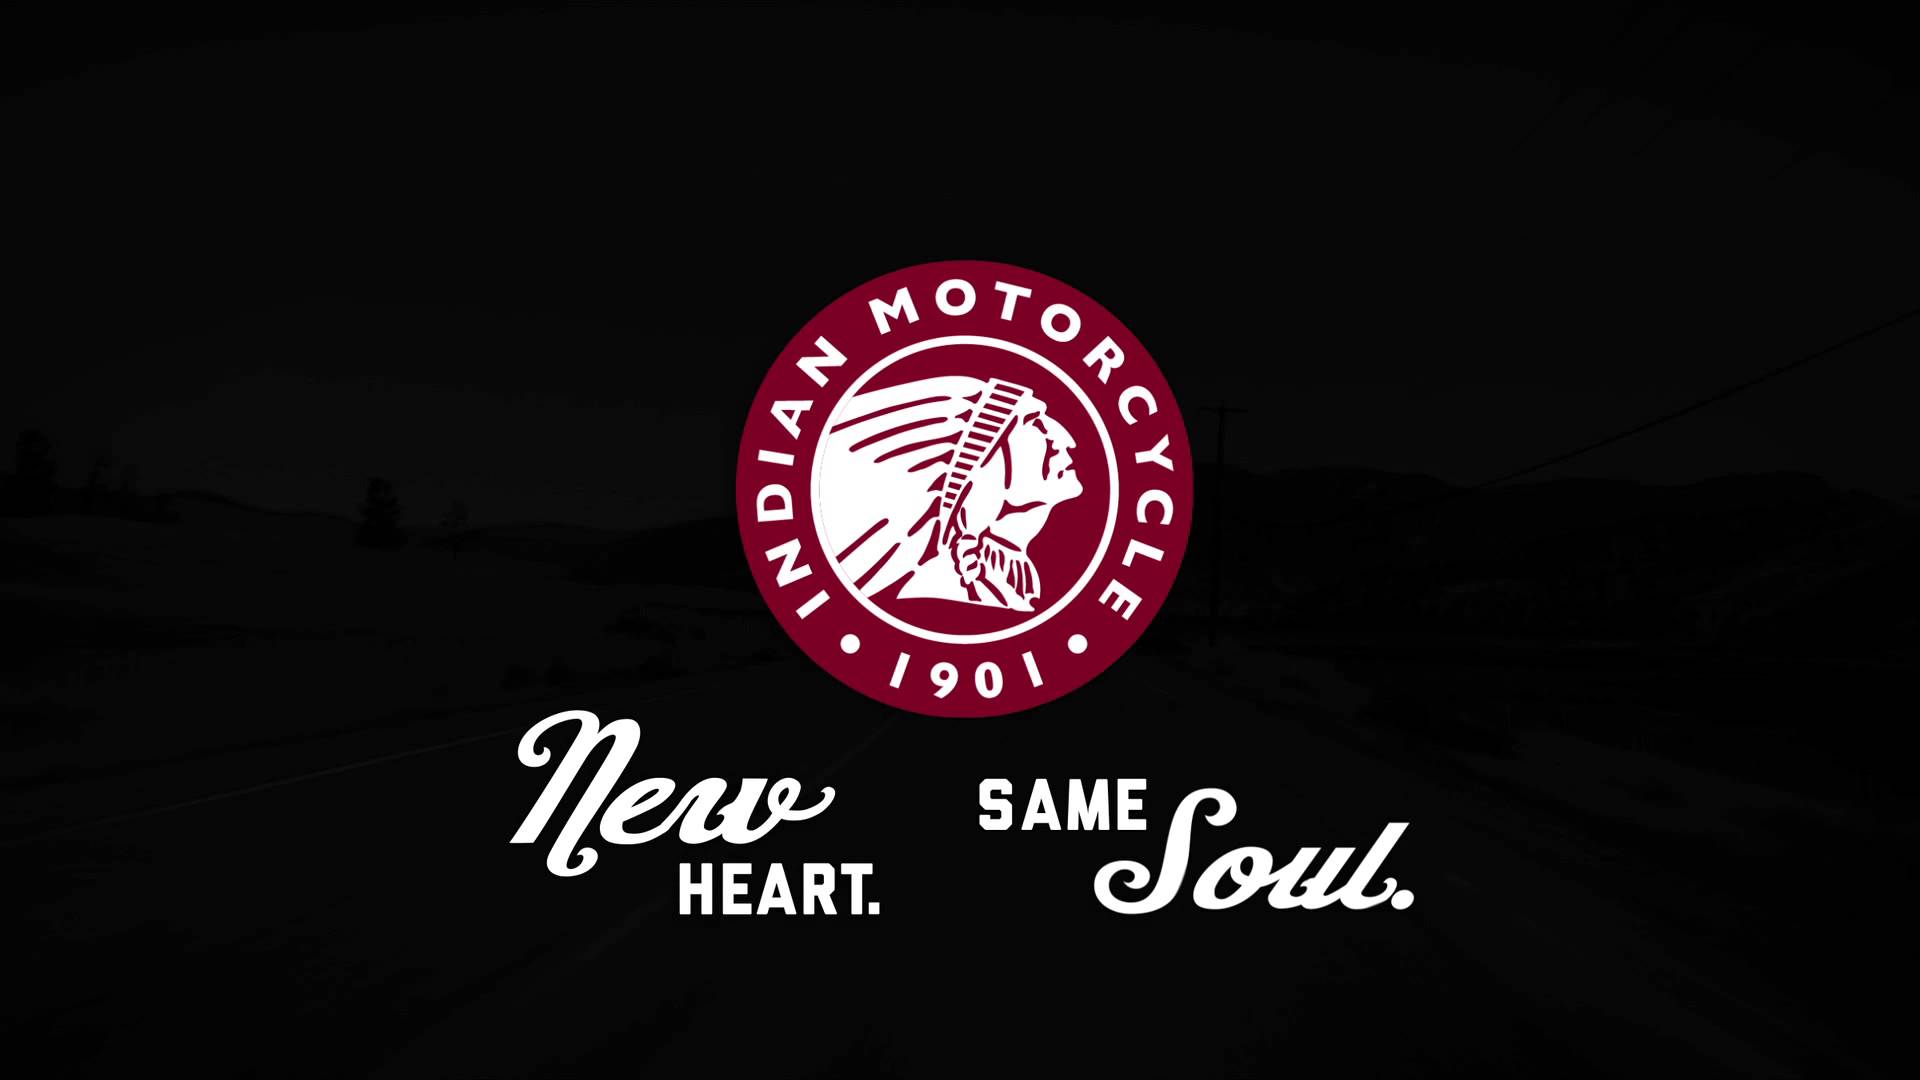 Indian Motorcycle: New Heart. Same Soul